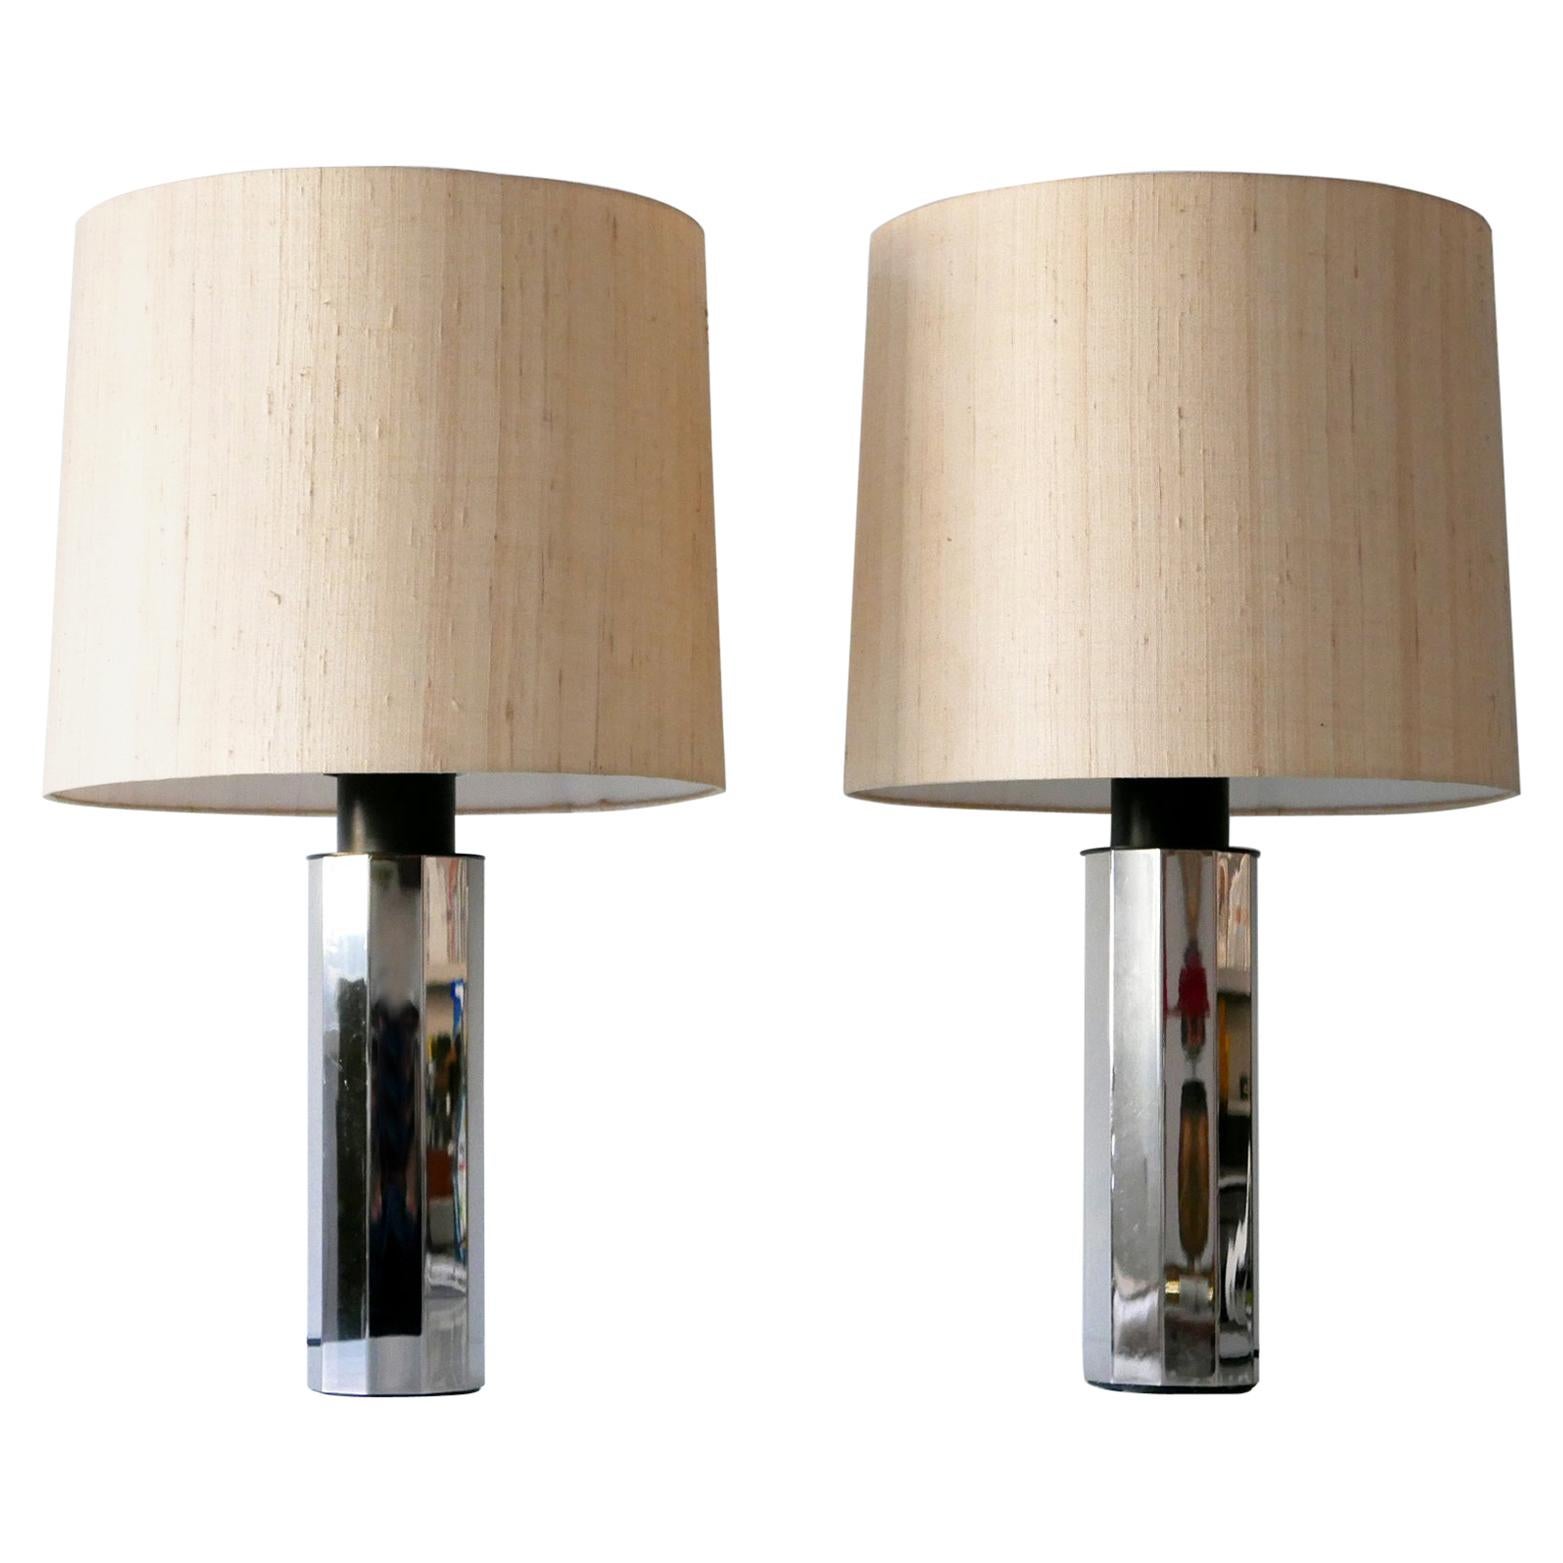 Set of Two Huge, 5-Flamed Midcentury Decagonal Chrome Table Lamps 1960s, Germany